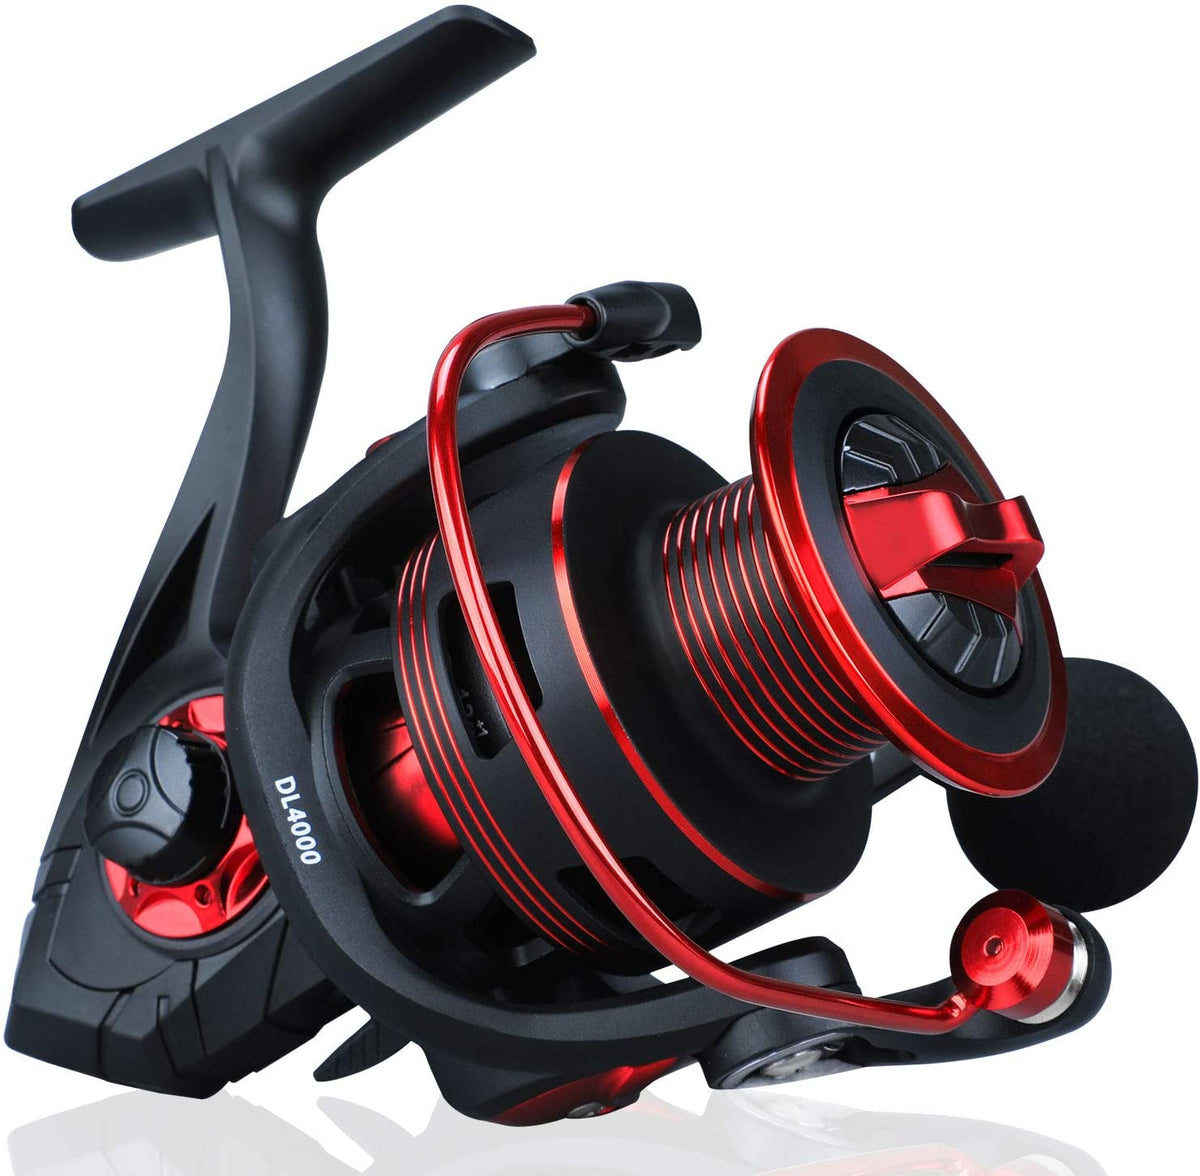 One Bass Fishing reels Light Weight Saltwater Spinning Reel 39.5 LB Carbon Fiber Drag,12+1 BB Ultra Smooth All Aluminum Inshore Reel Saltwater Freshwater